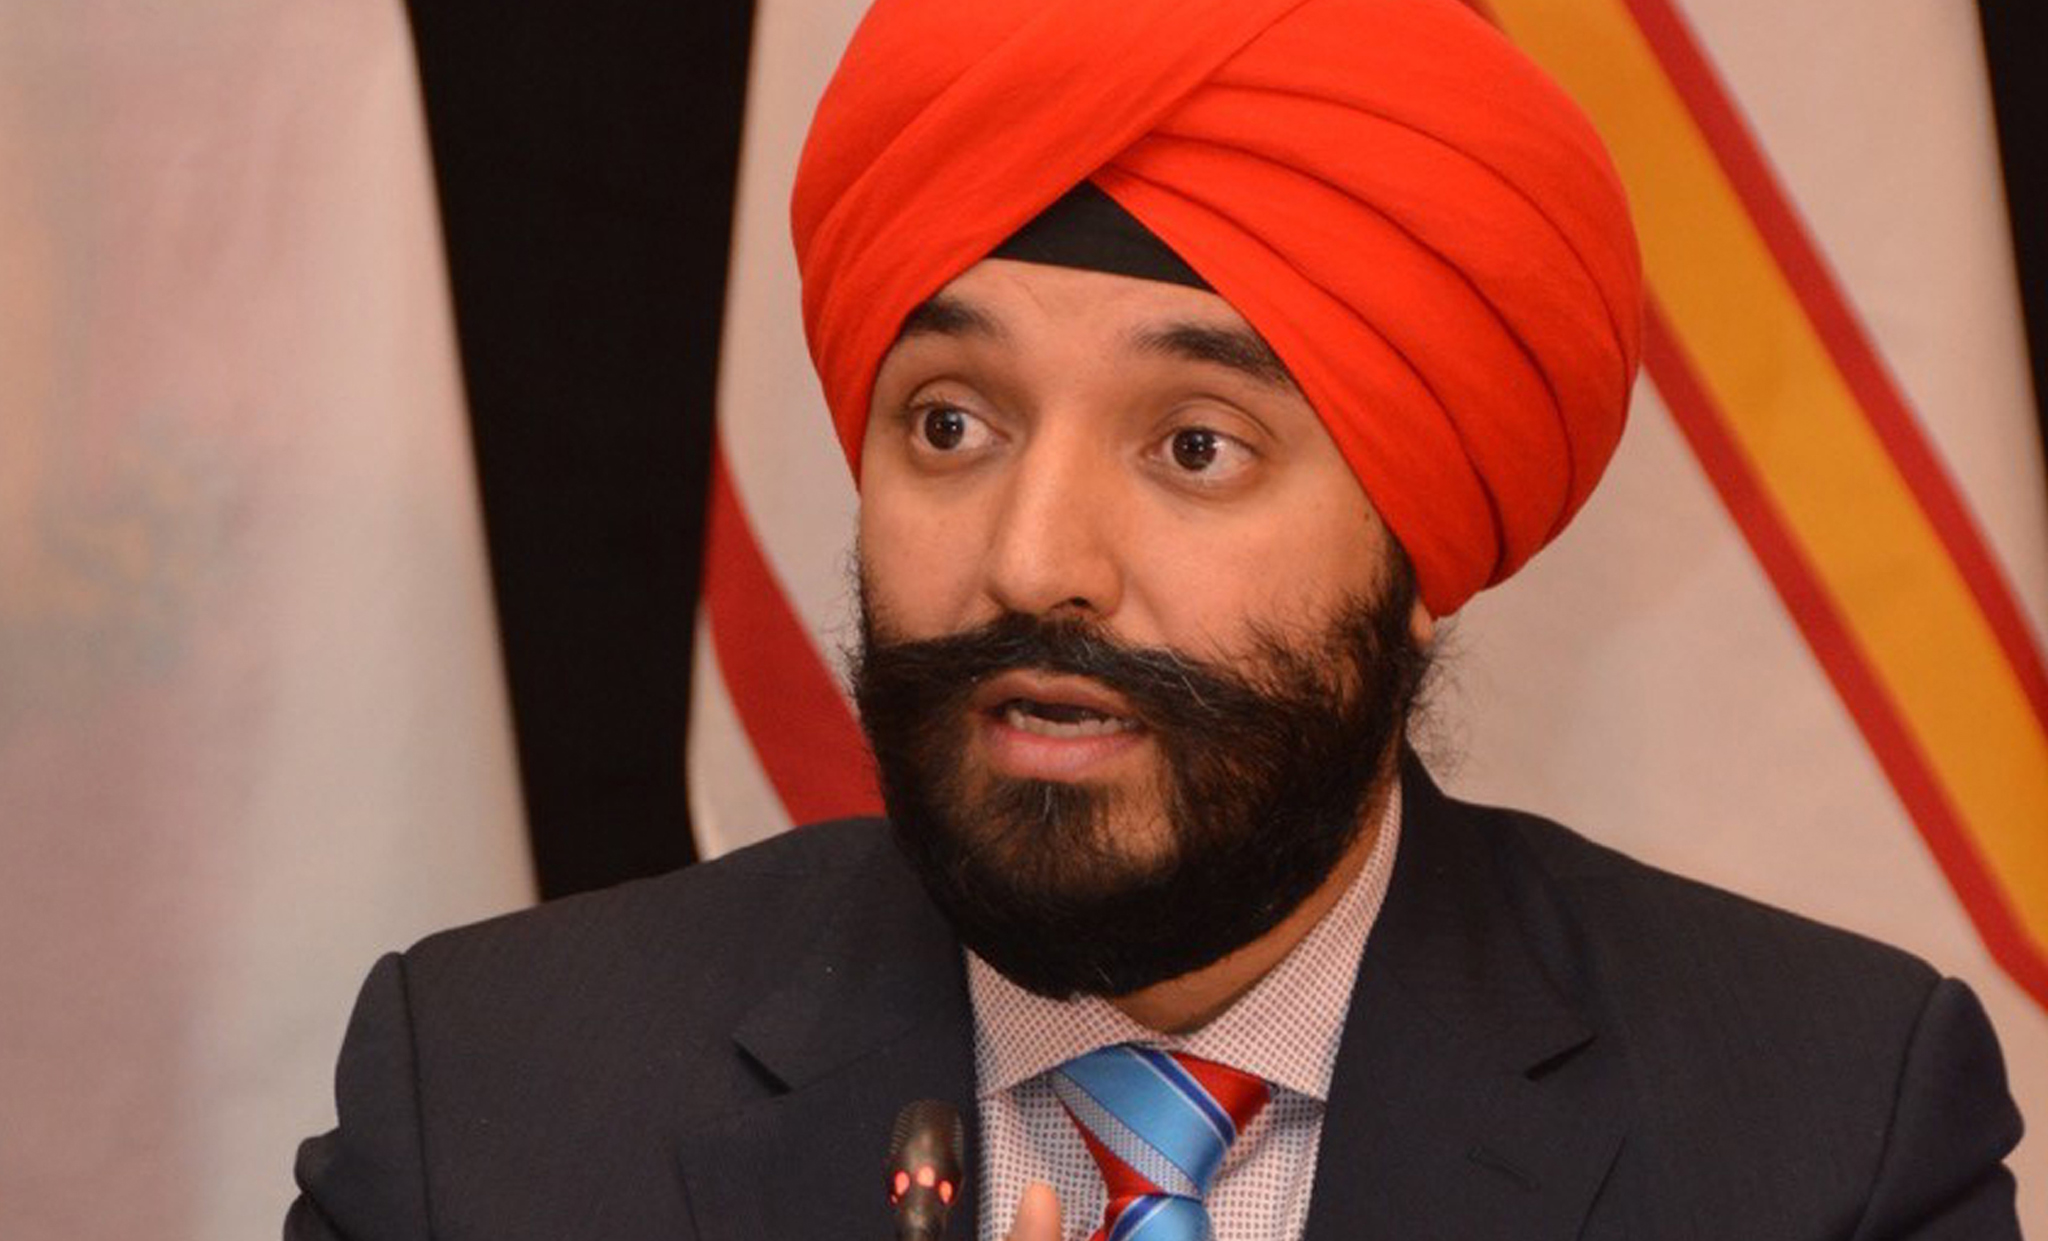 January 27, 2017 - The Honourable Navdeep Bains, Minister of Innovation, Science and Economic Development, announces the expansion of the Accelerated Growth Service in Atlantic Canada during a news conference in Wolfville, Nova Scotia.